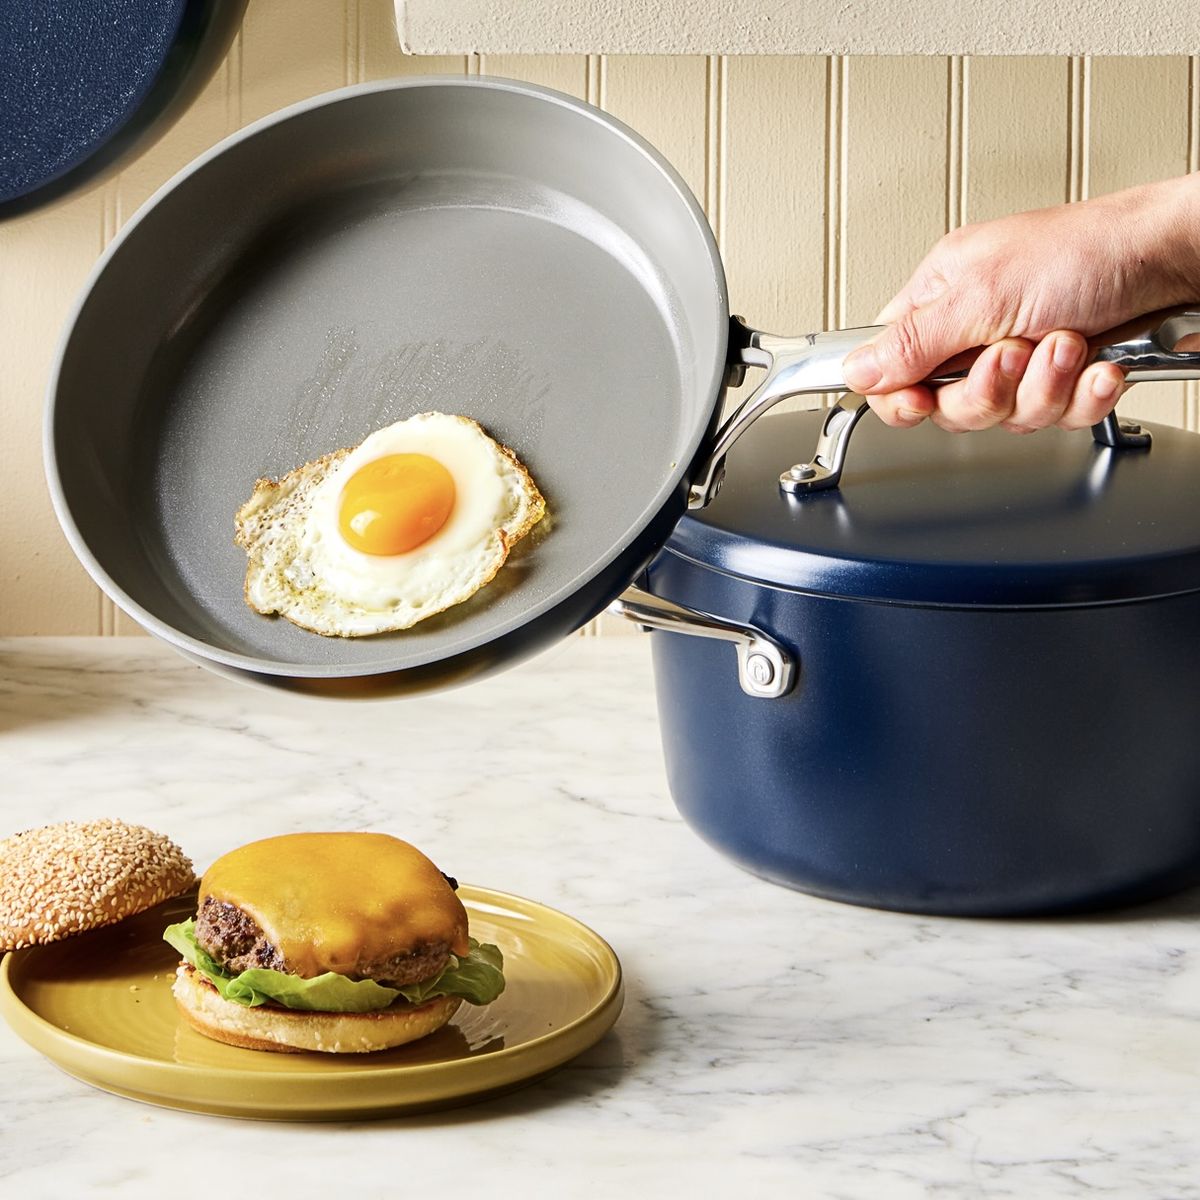 How to Clean Nonstick Pans and Keep Them Like New